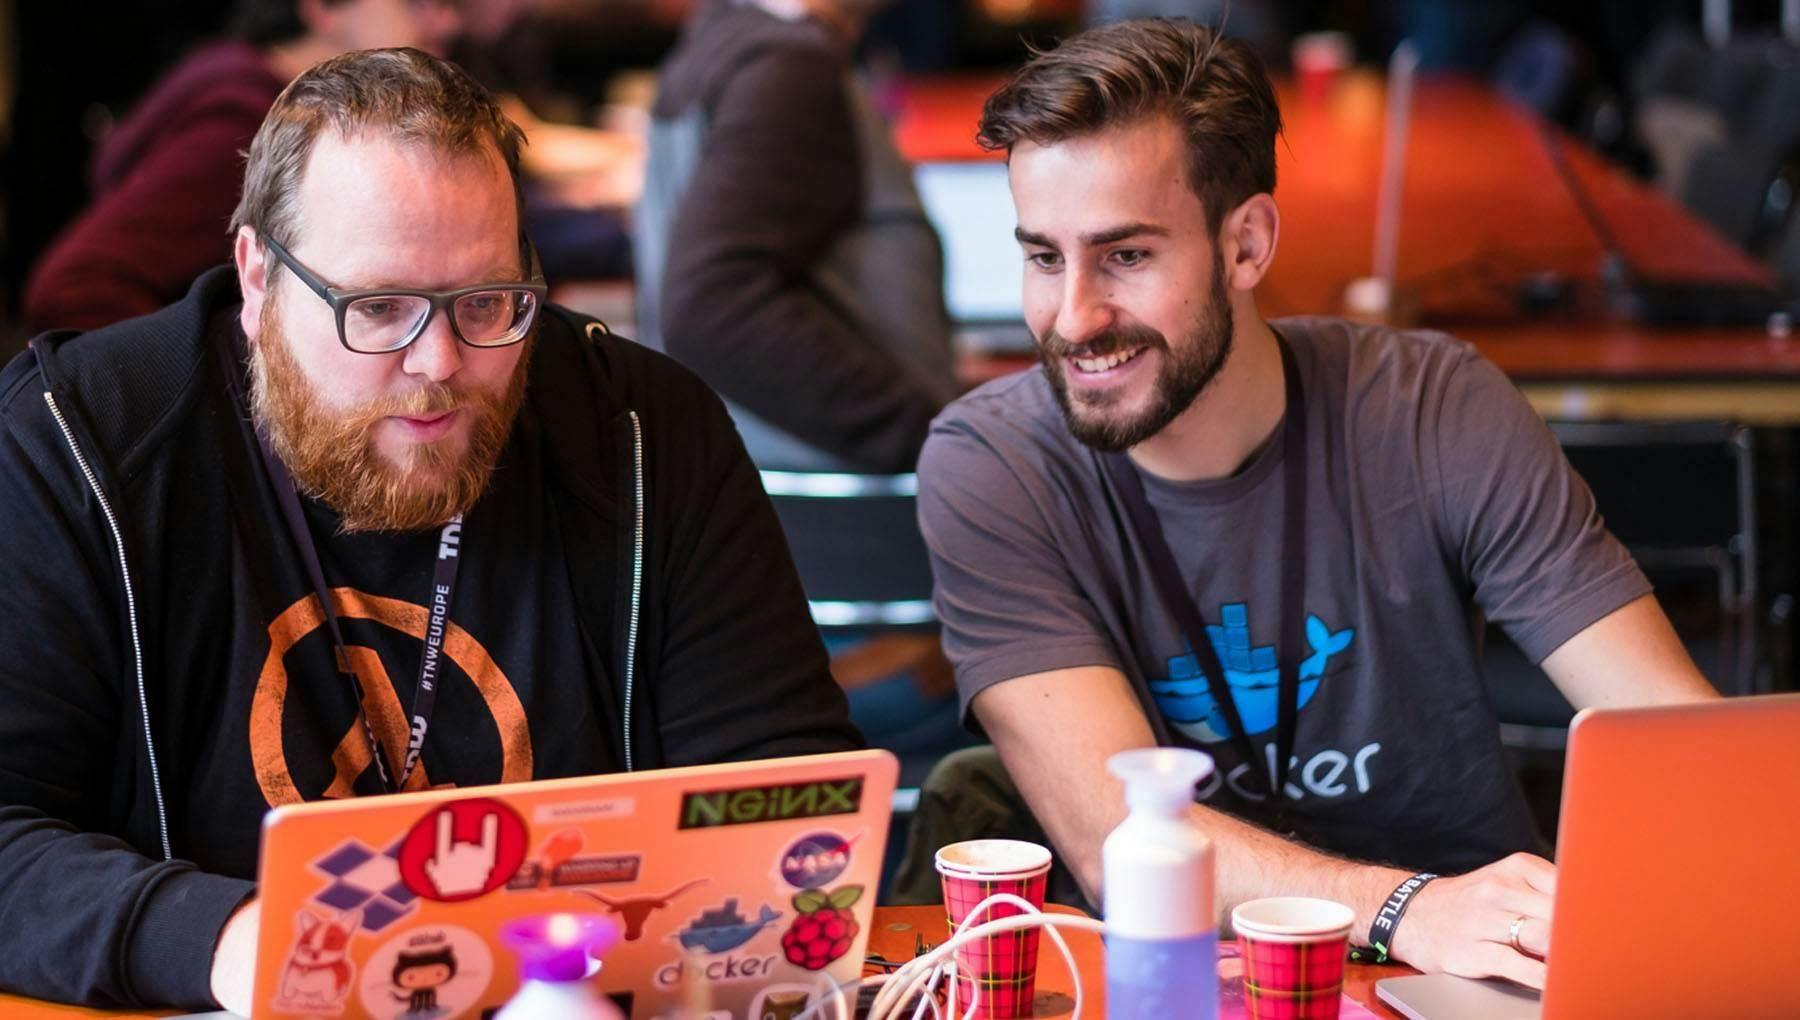 Two people seated with their laptops at The Next Web Amsterdam 2016 Hack Battle, one man smiling as he looks at another's screen.